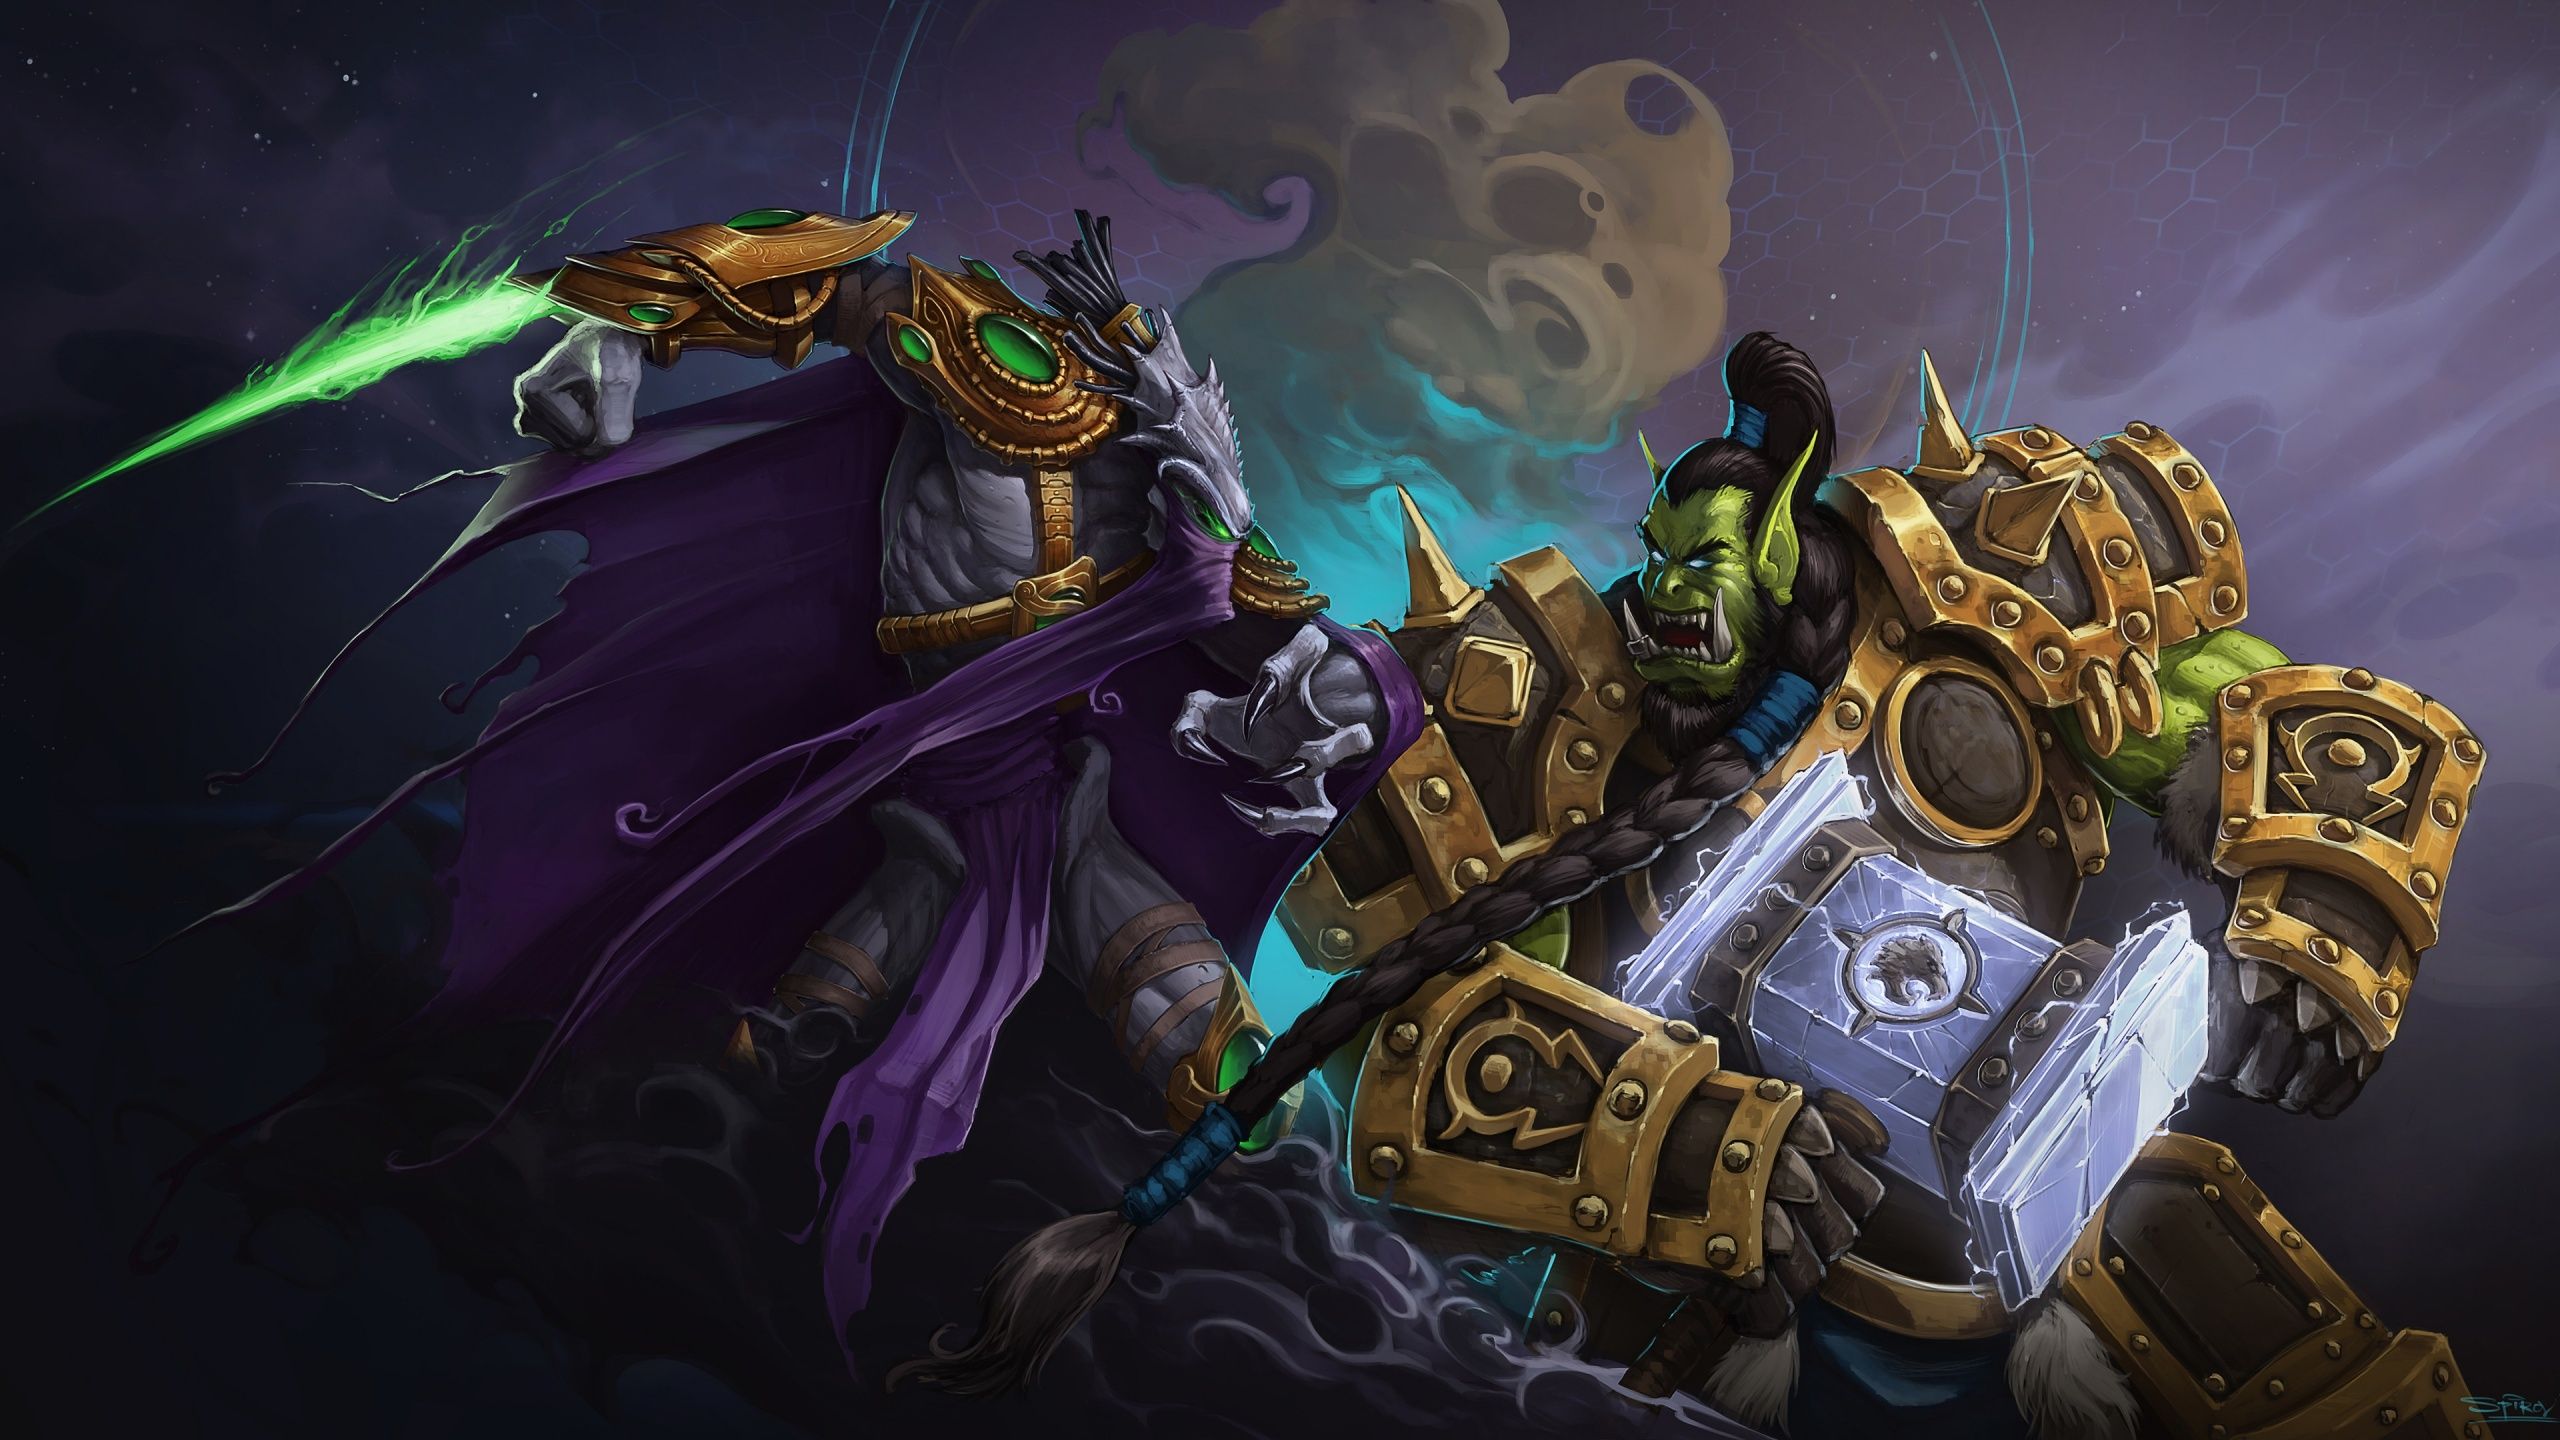 Thrall Vs Zeratul Heroes Of The Storm Wallpapers - 2560x1440 - 872678